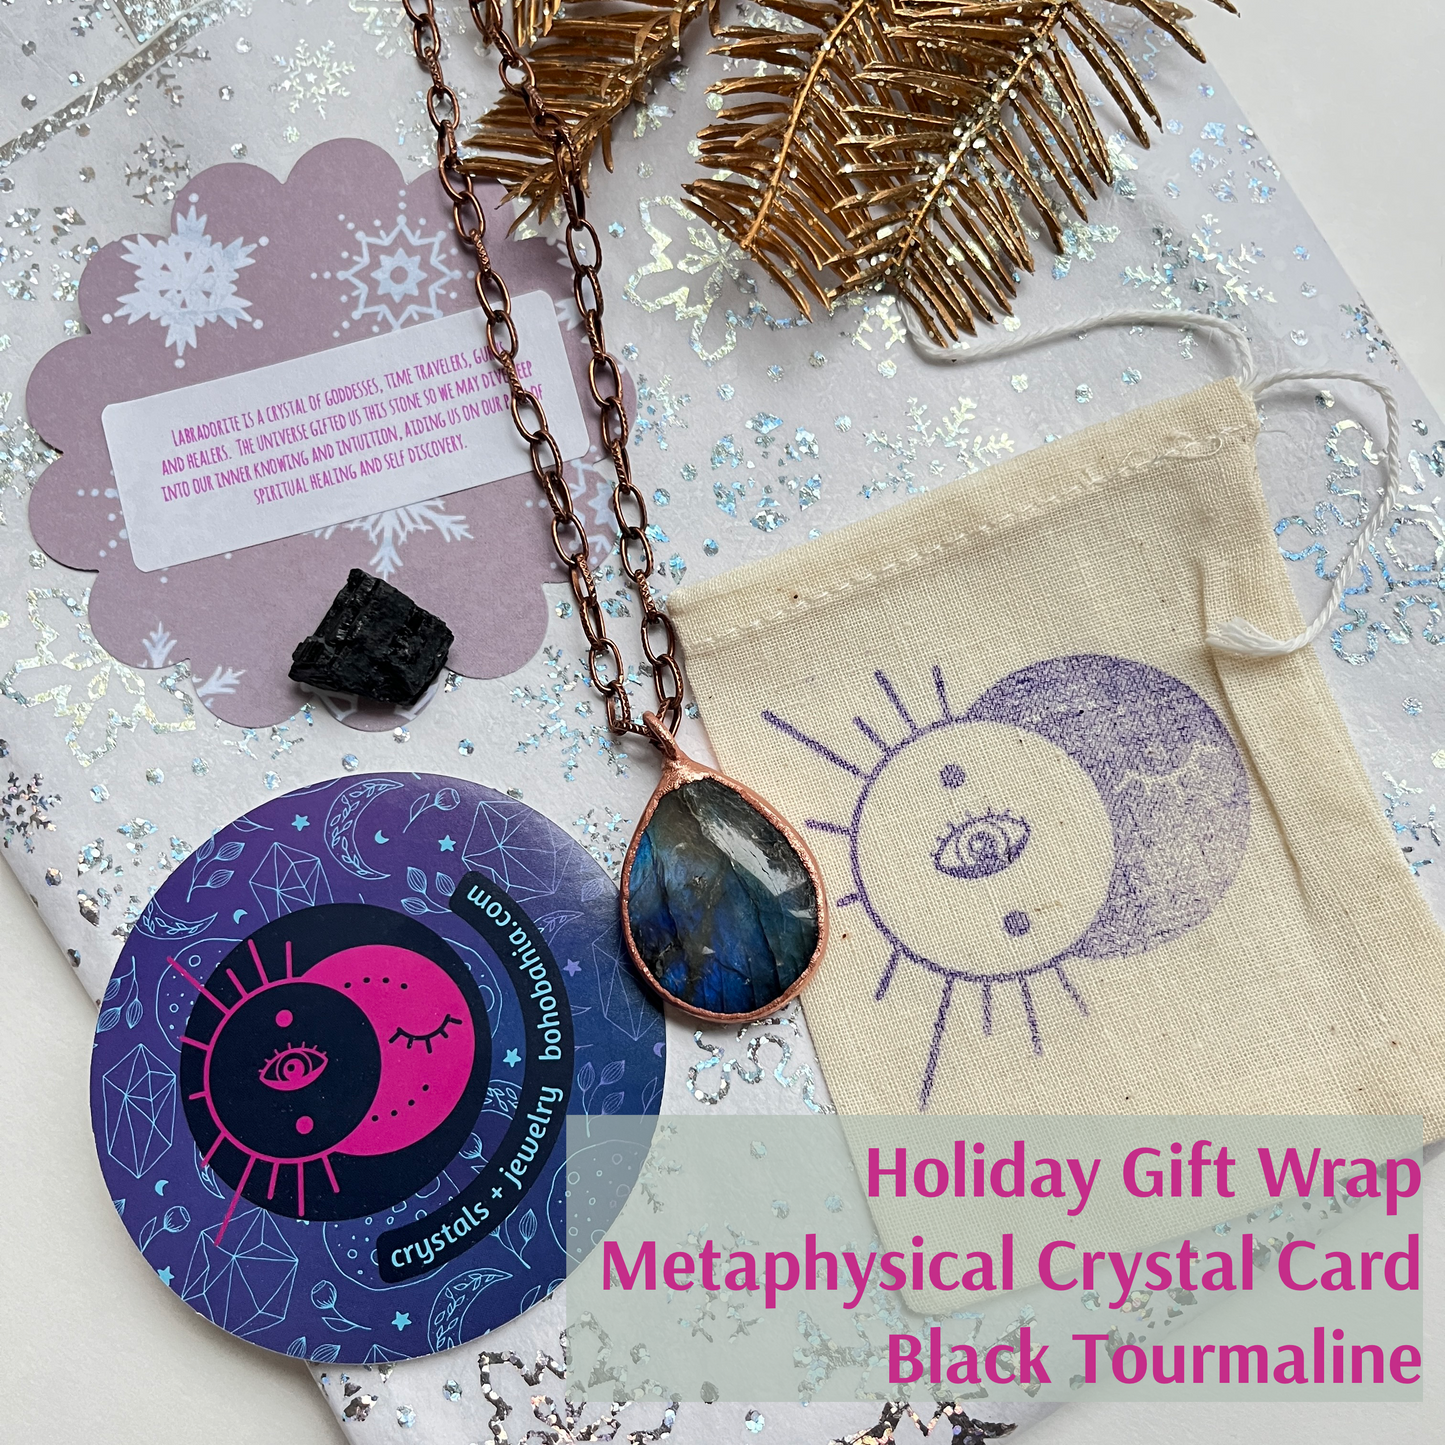 electroformed crystal jewelry makes a perfect holiday gift, don't delay purchase to get it delived in time.  Ships with special holiday gift wrap.